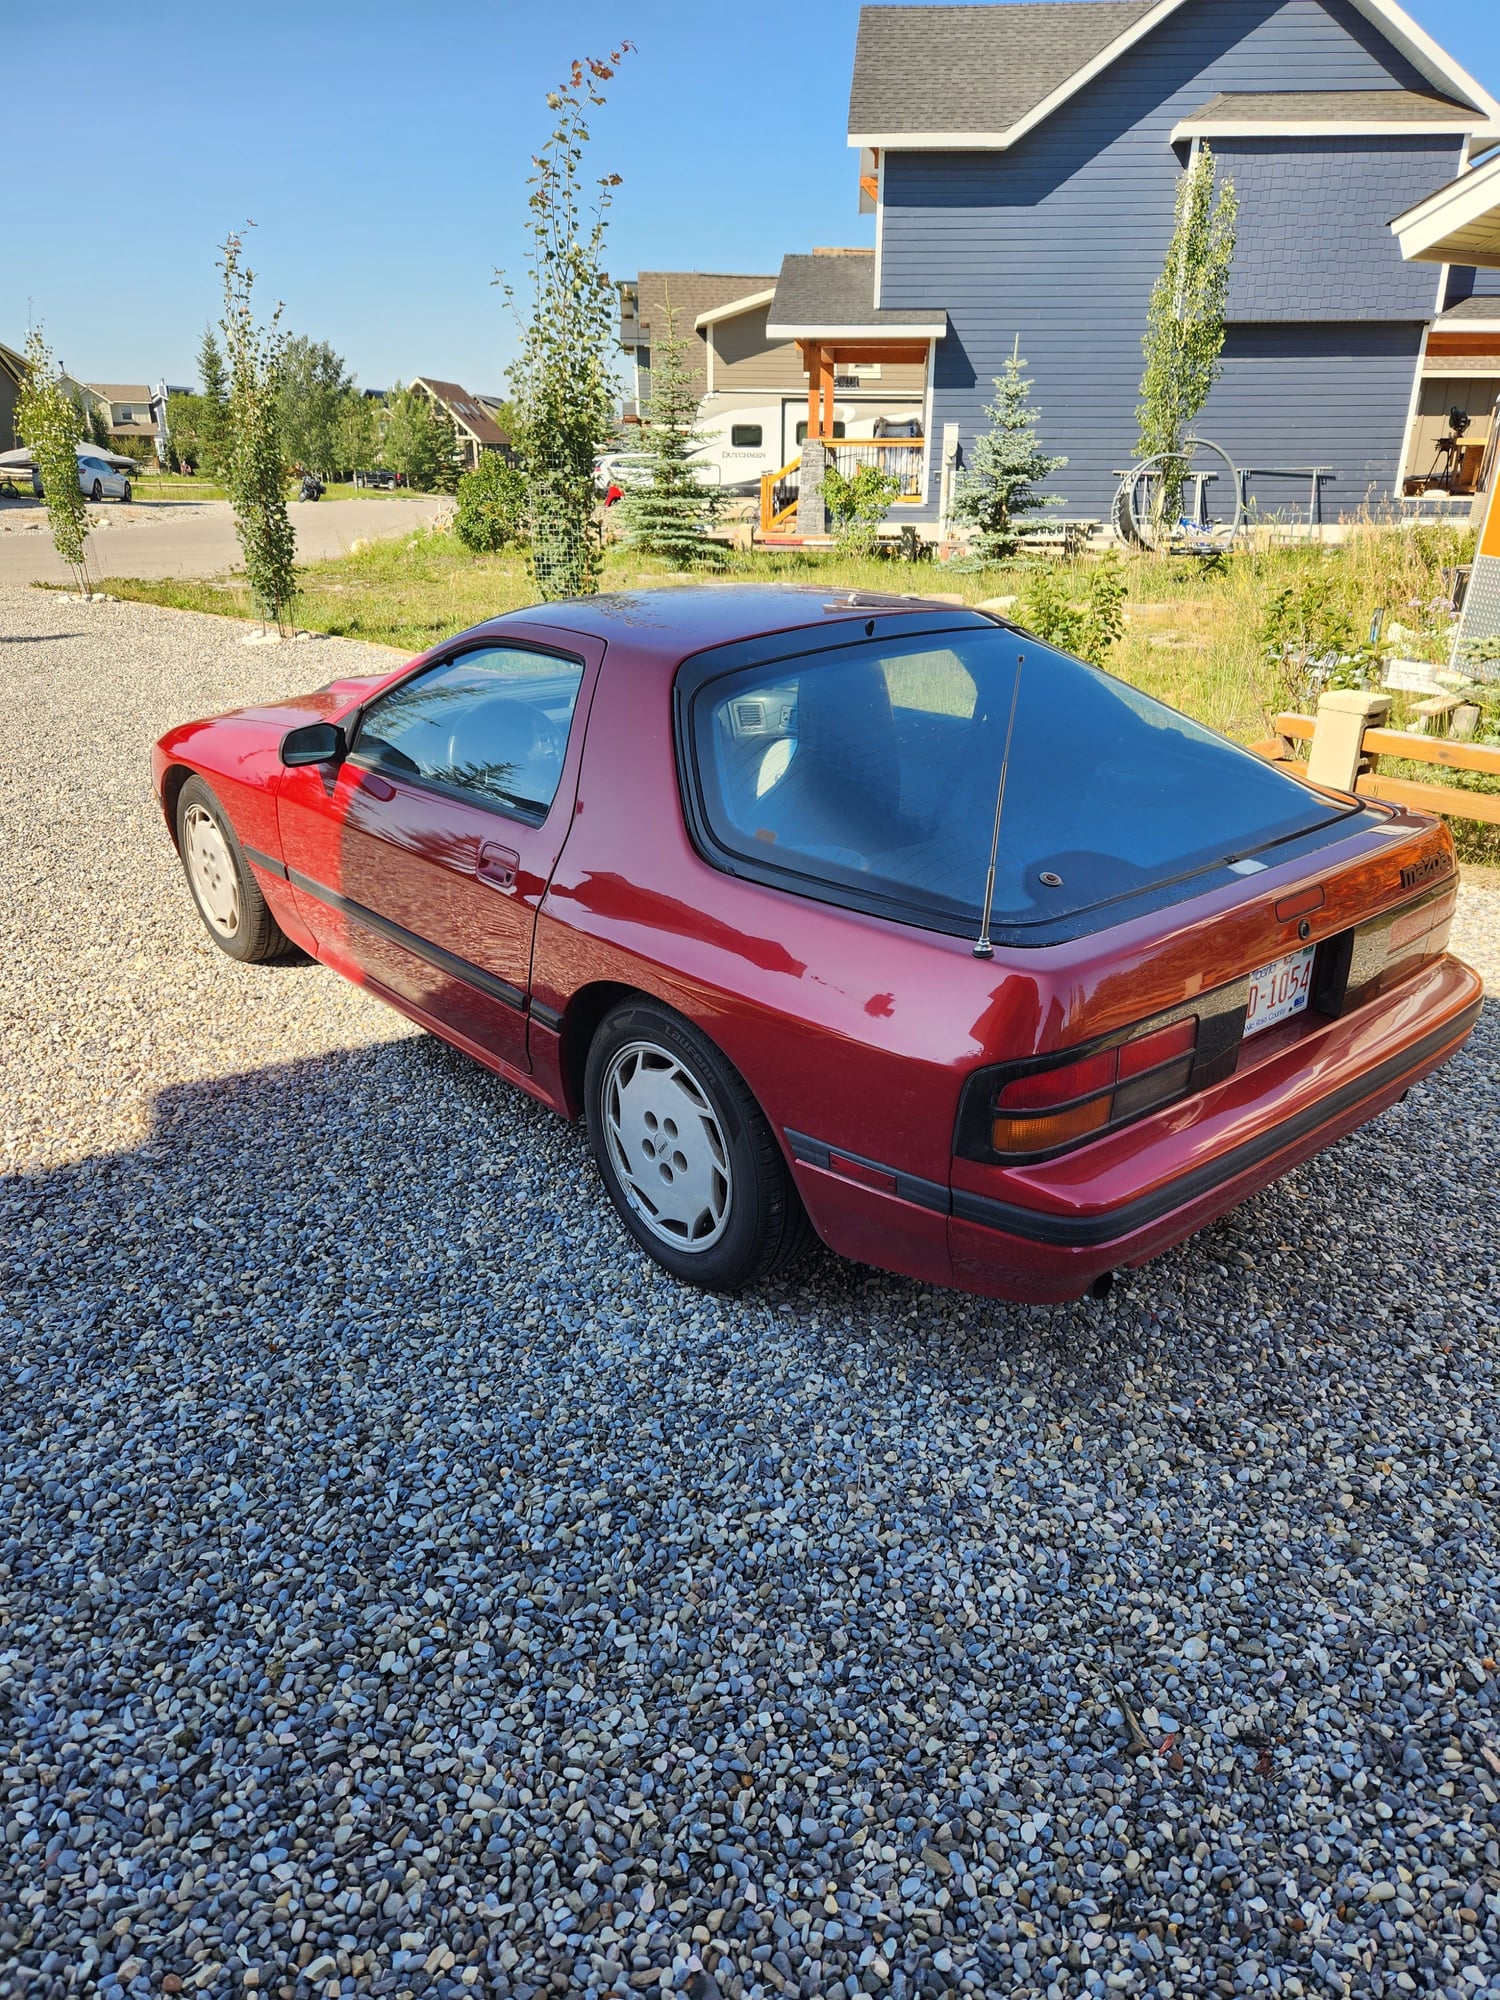 1987 Mazda RX-7 - Turbo II conversion NA RX7 - Used - VIN WP0CA2998XS655383 - 100,000 Miles - Other - 2WD - Manual - Coupe - Red - Calgary, AB T4C1B3, Canada